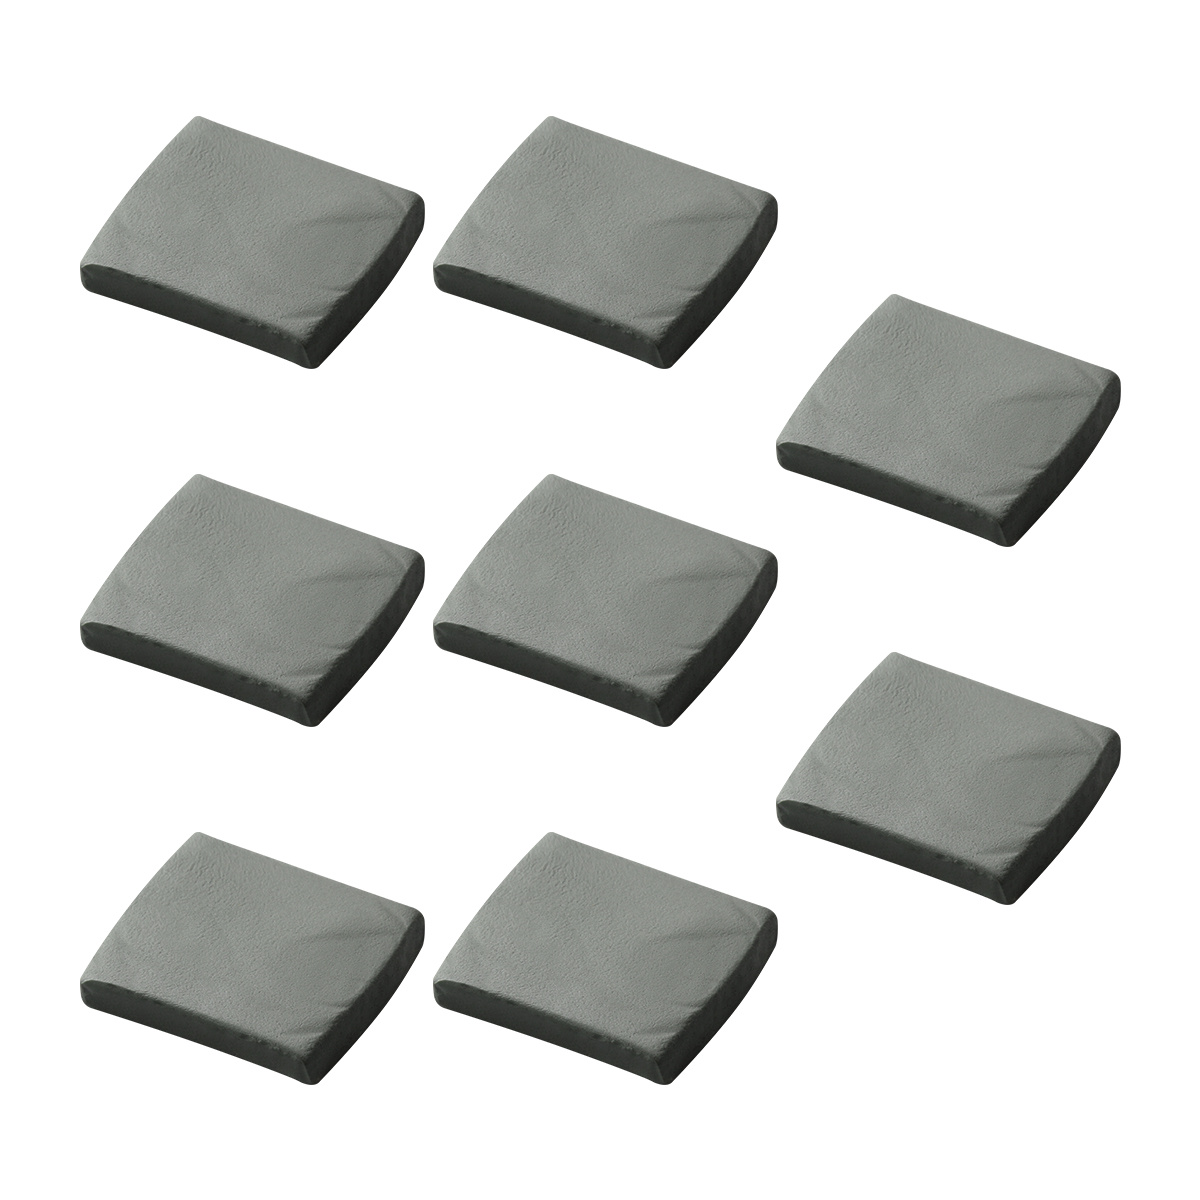 3/6pcs, Gray, Kneaded Erasers For Artists, Gum Eraser, Art Eraser,  Kneadable Erasers, Moldable Eraser, Art Erasers For Drawing, Artist Eraser,  Drawing